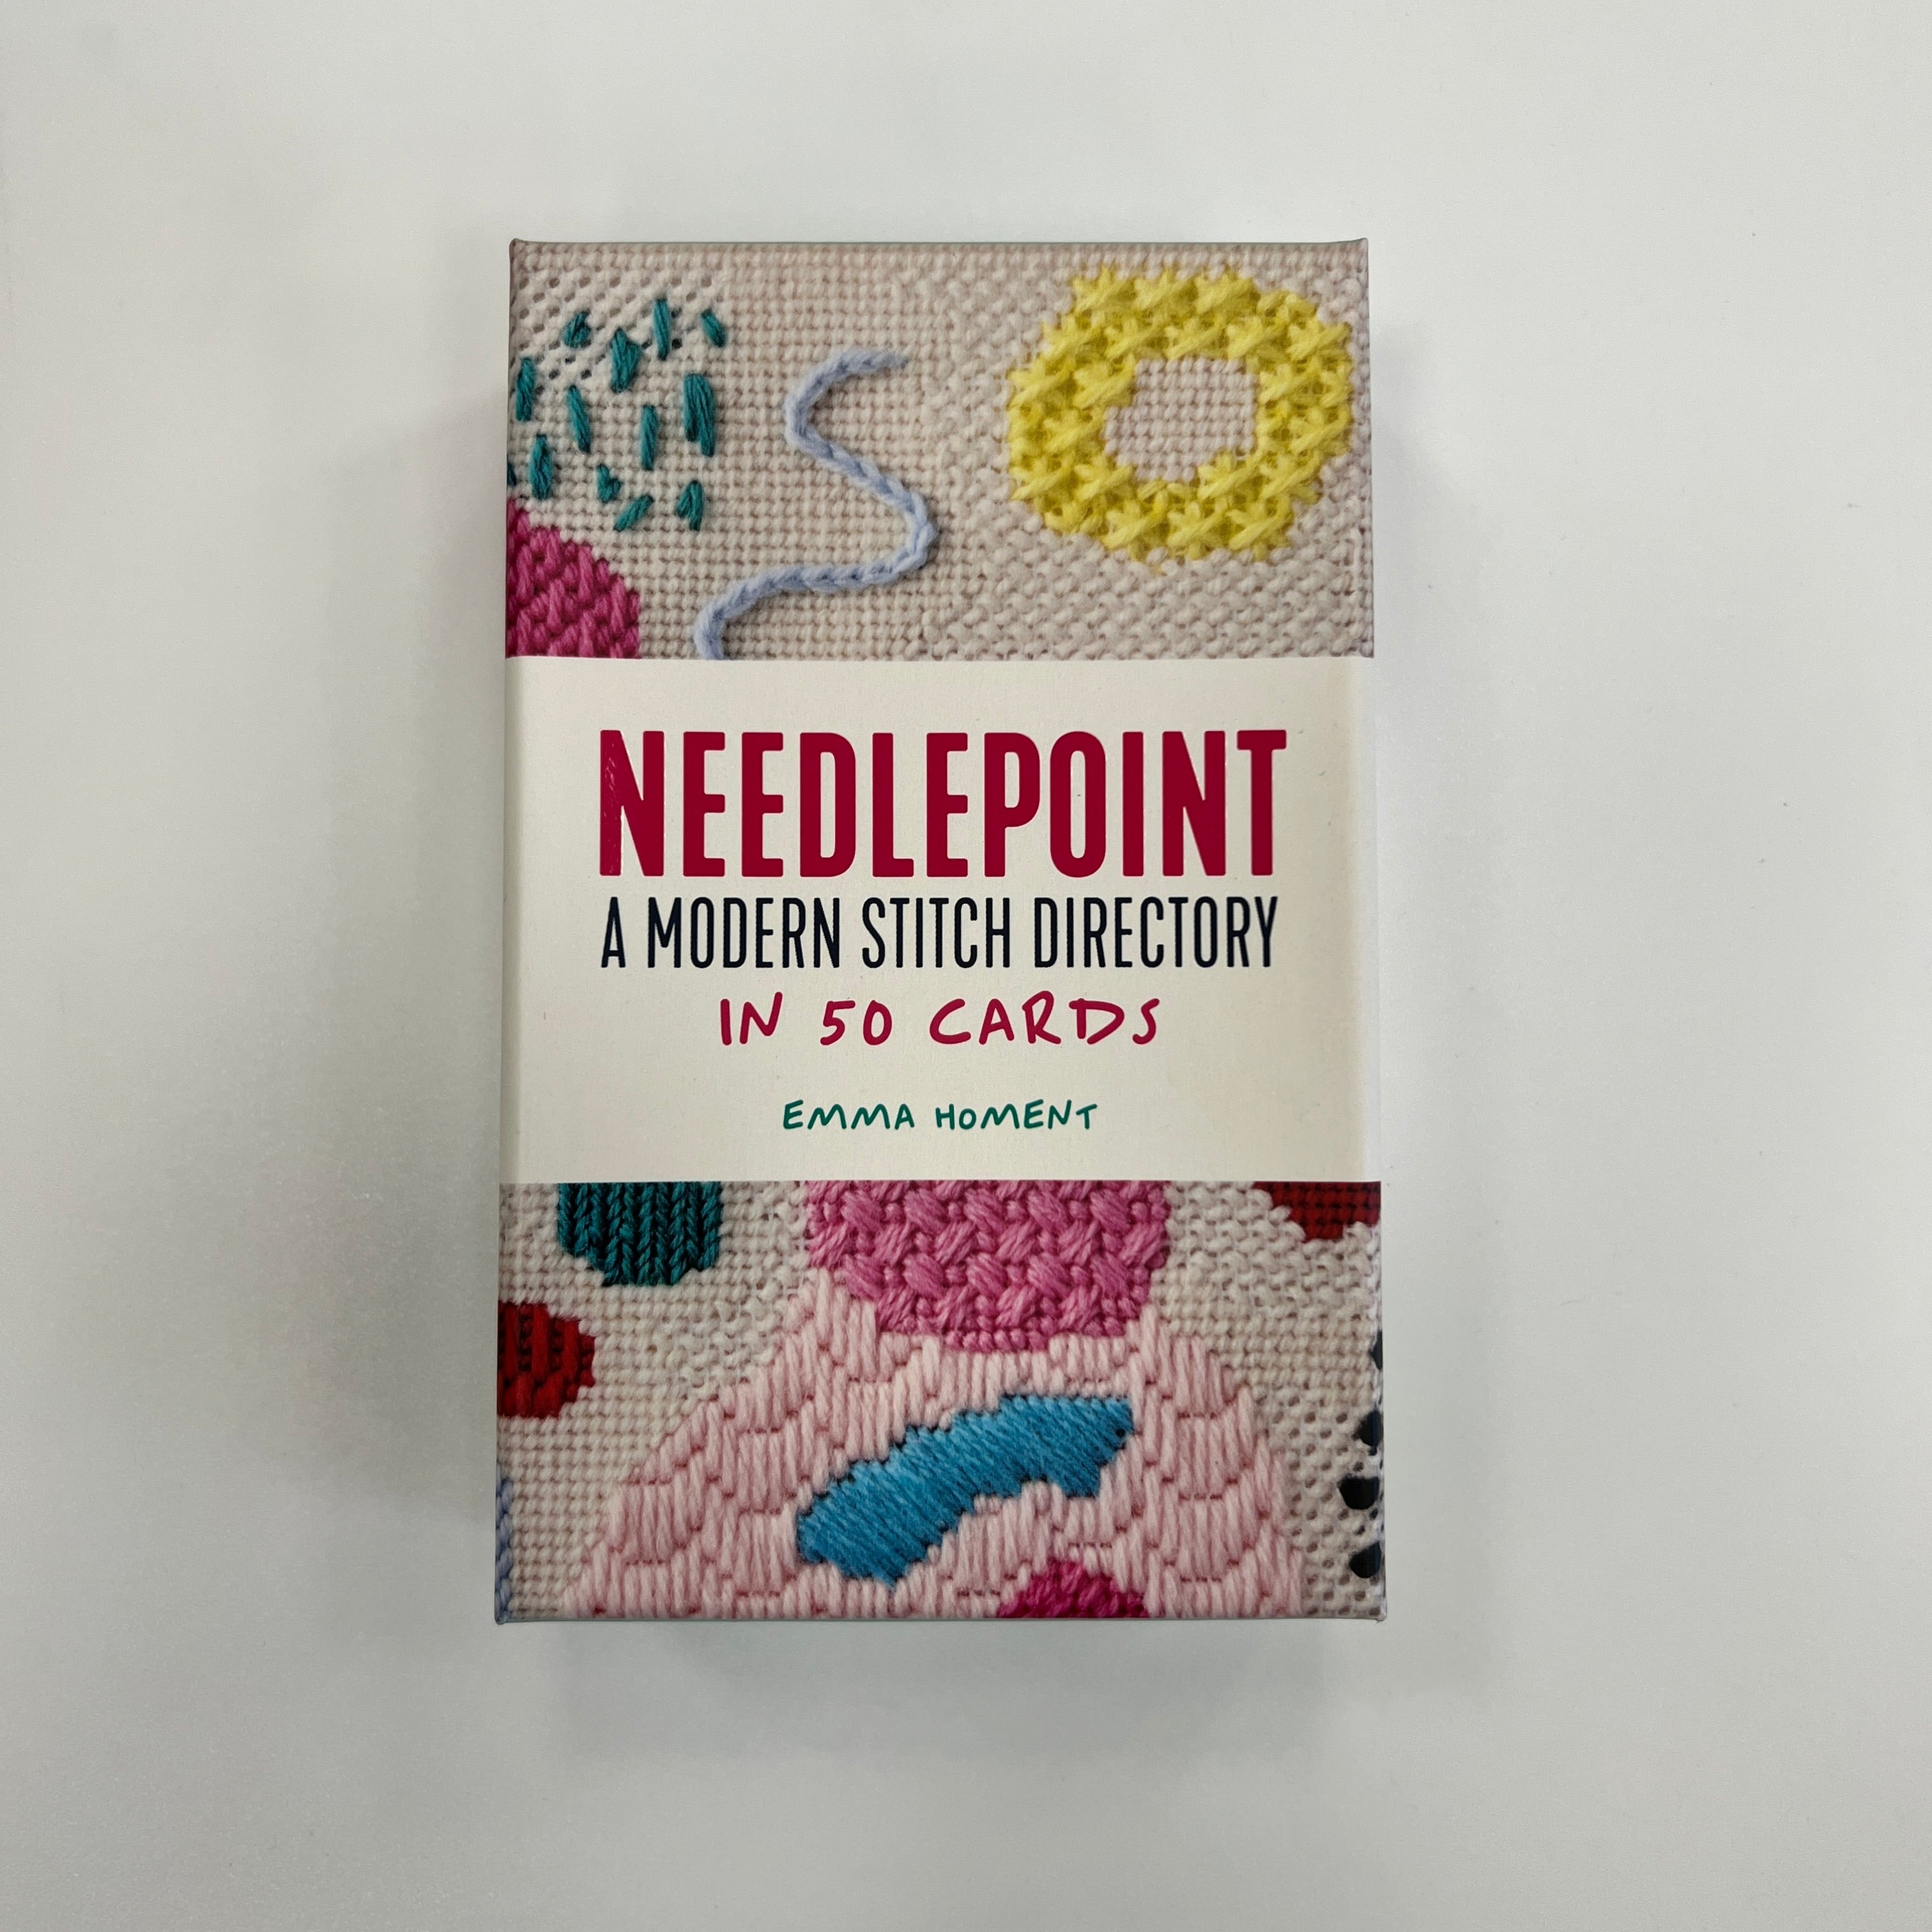 Needlepoint: A Modern Stitch Directory in 50 Cards – Bargello Needlepoint